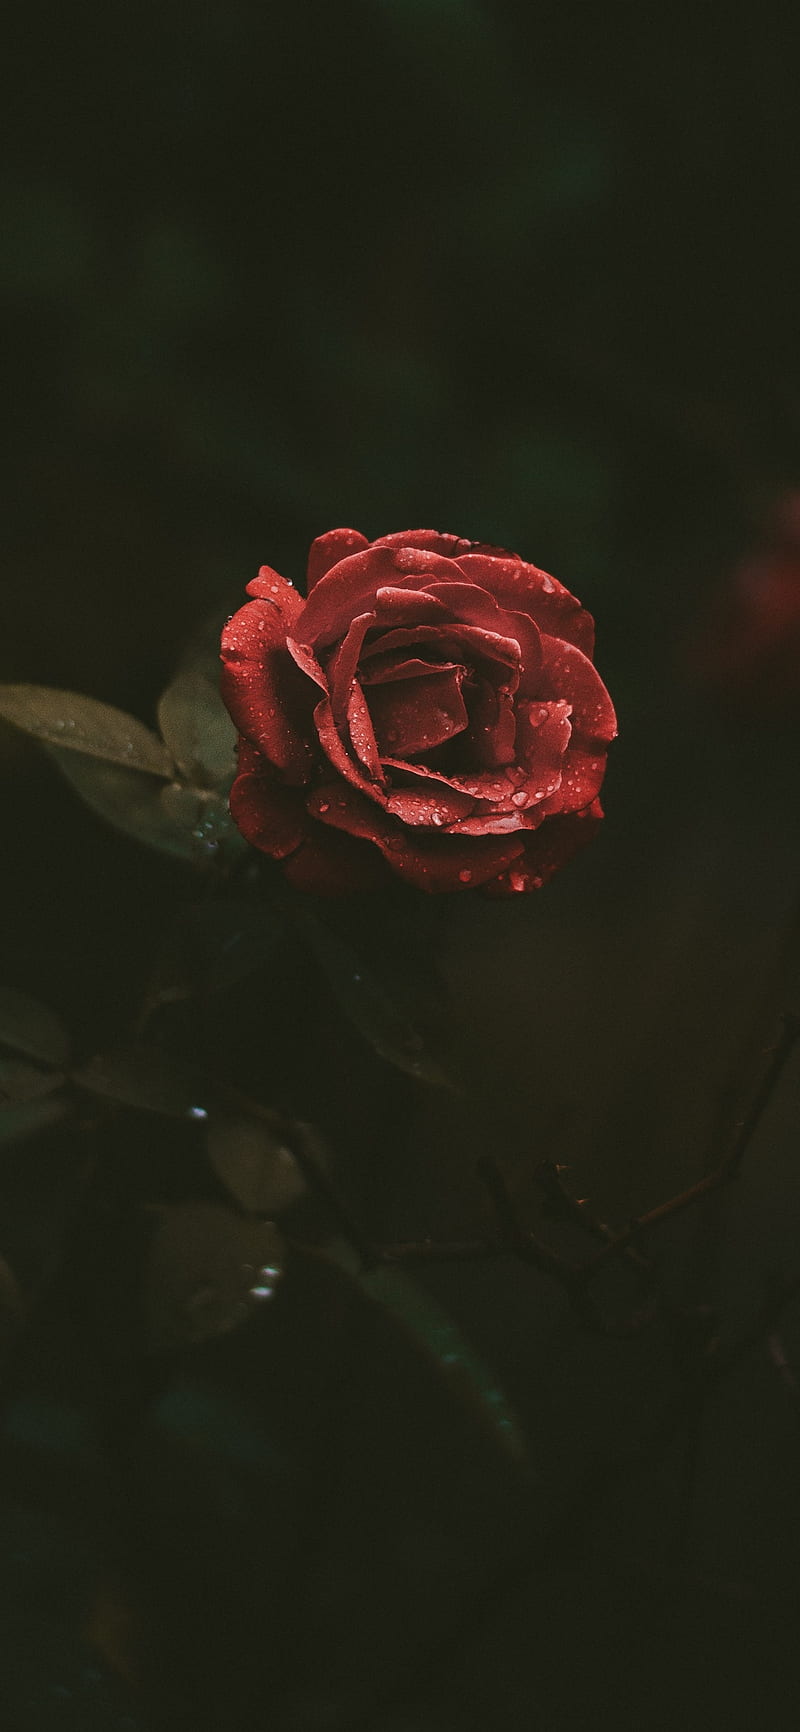 Red rose, petals, water droplets, darkness iPhone XS Max, X 8, 7, 6, 5, 4, 3GS, HD phone wallpaper